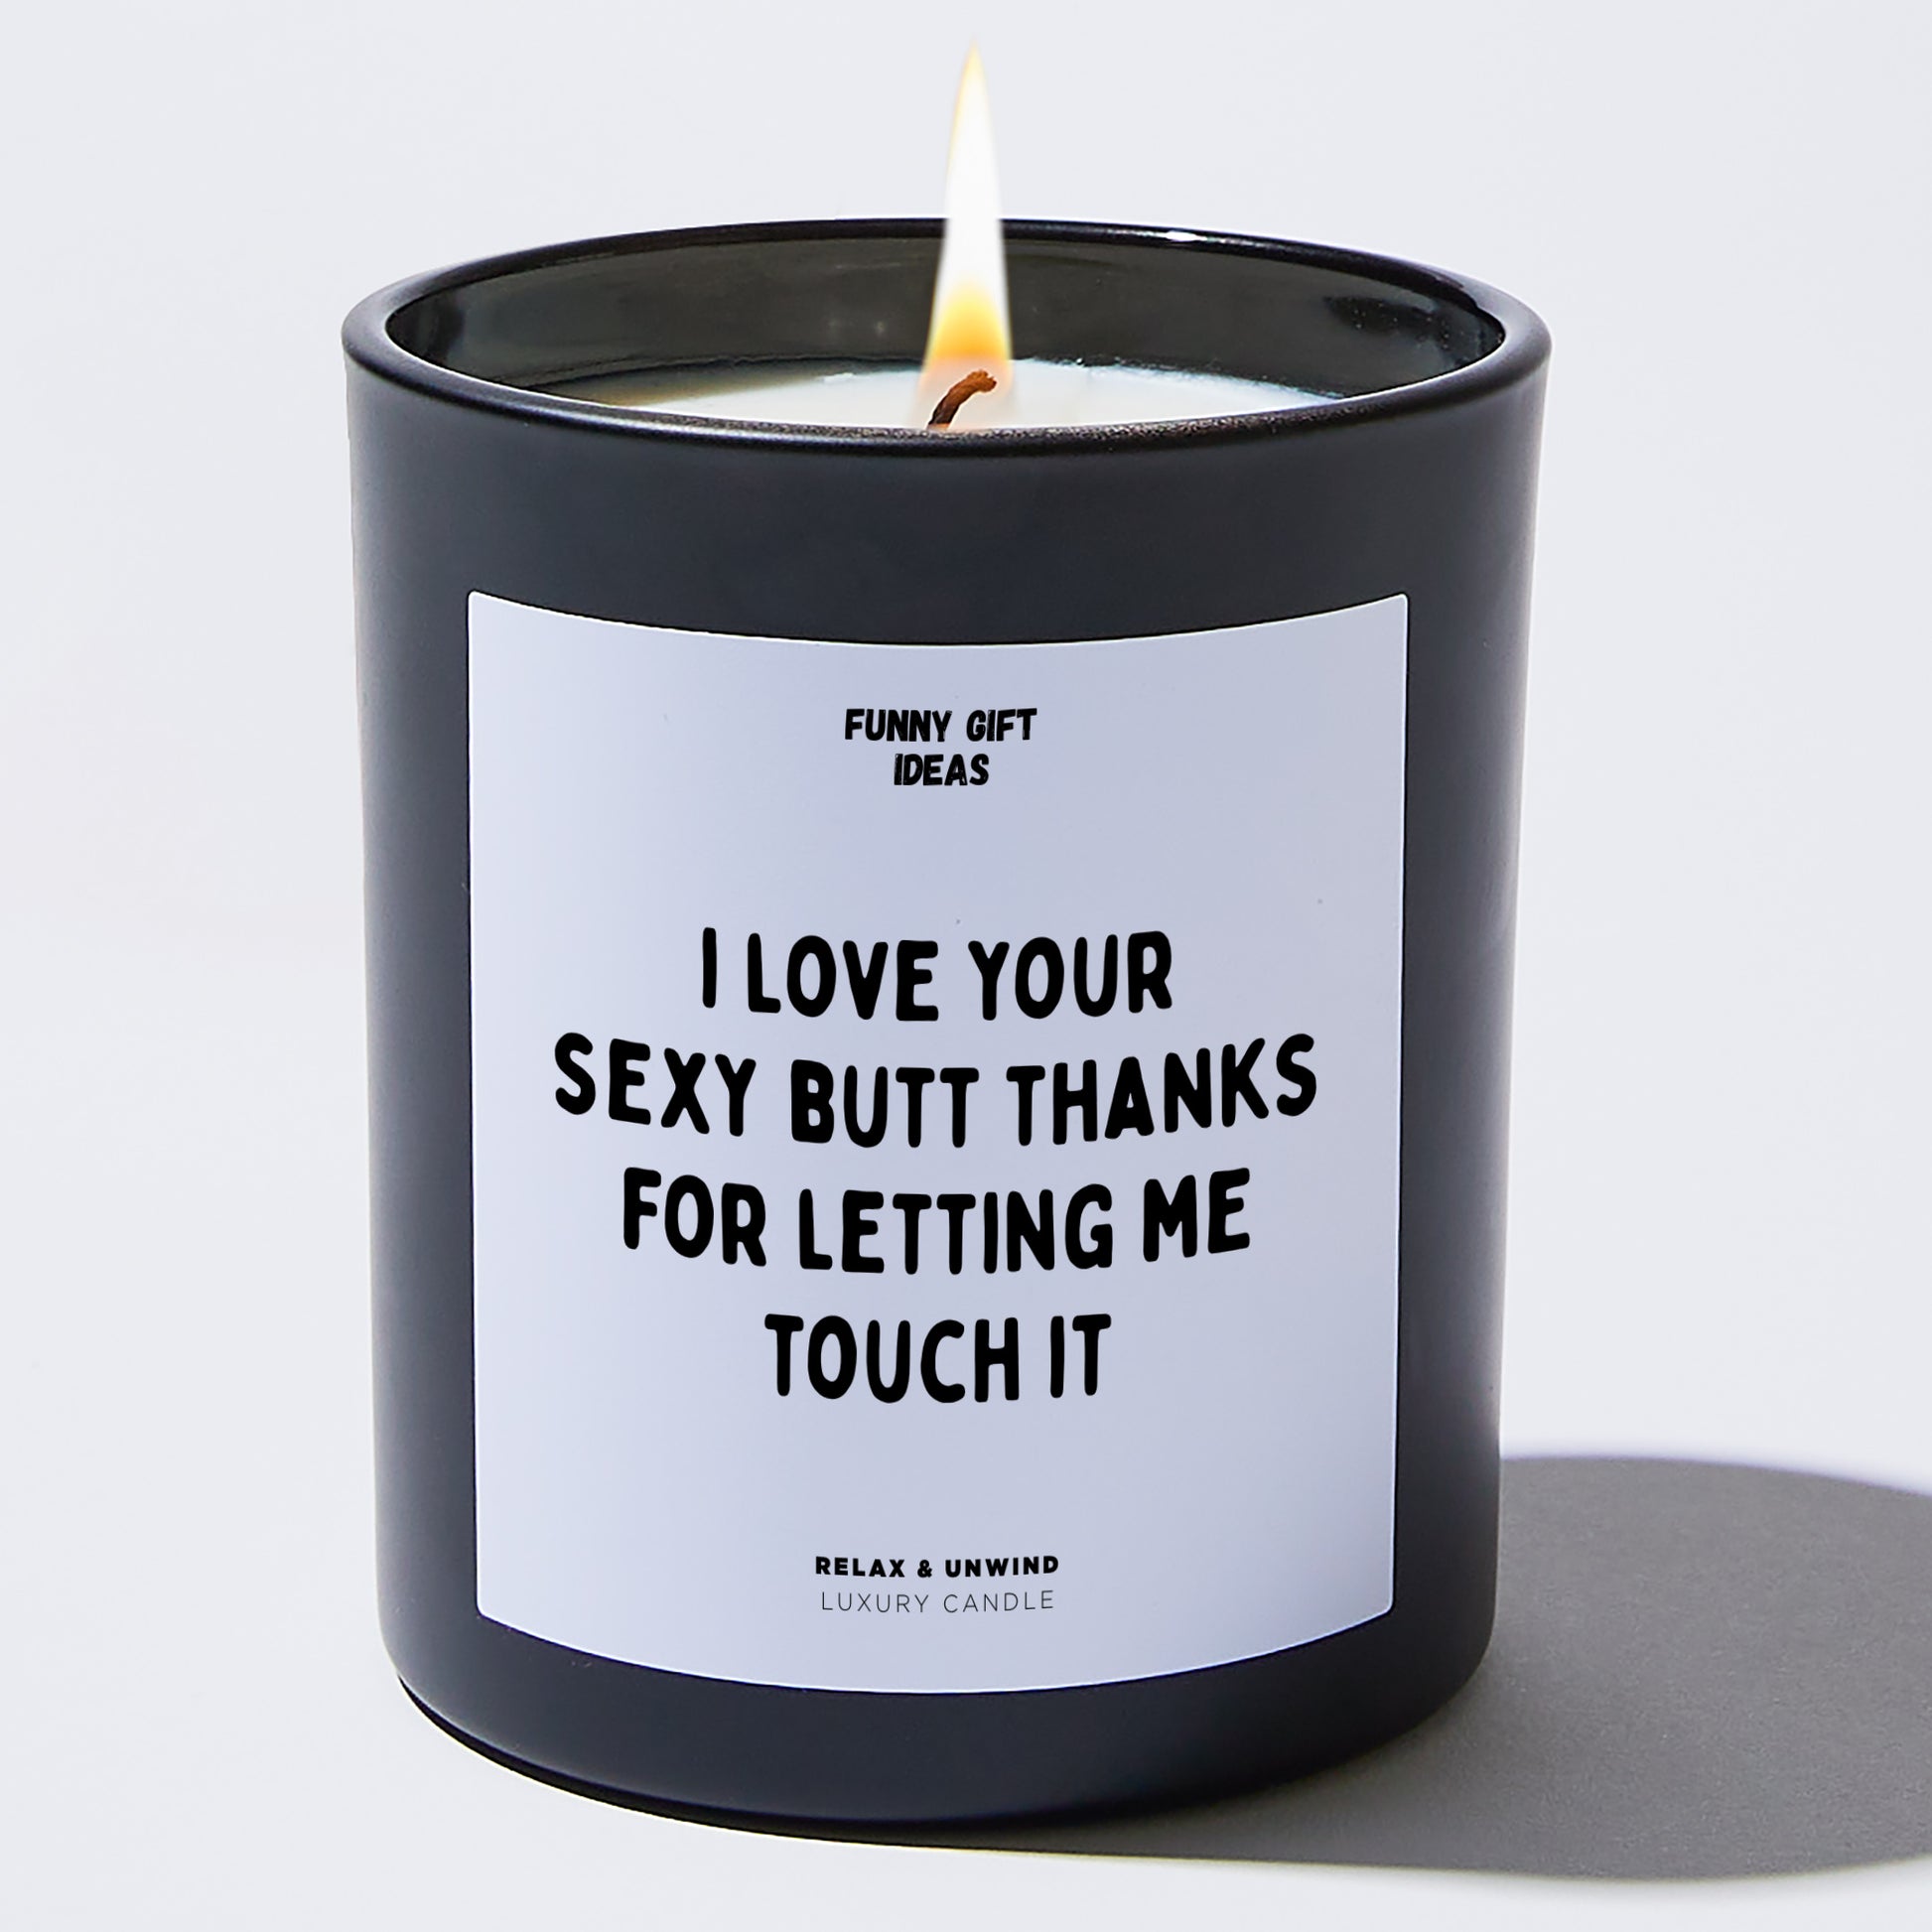 Anniversary I Love Your Sexy Butt. Thanks for Letting Me Touch It - Funny Gift Ideas